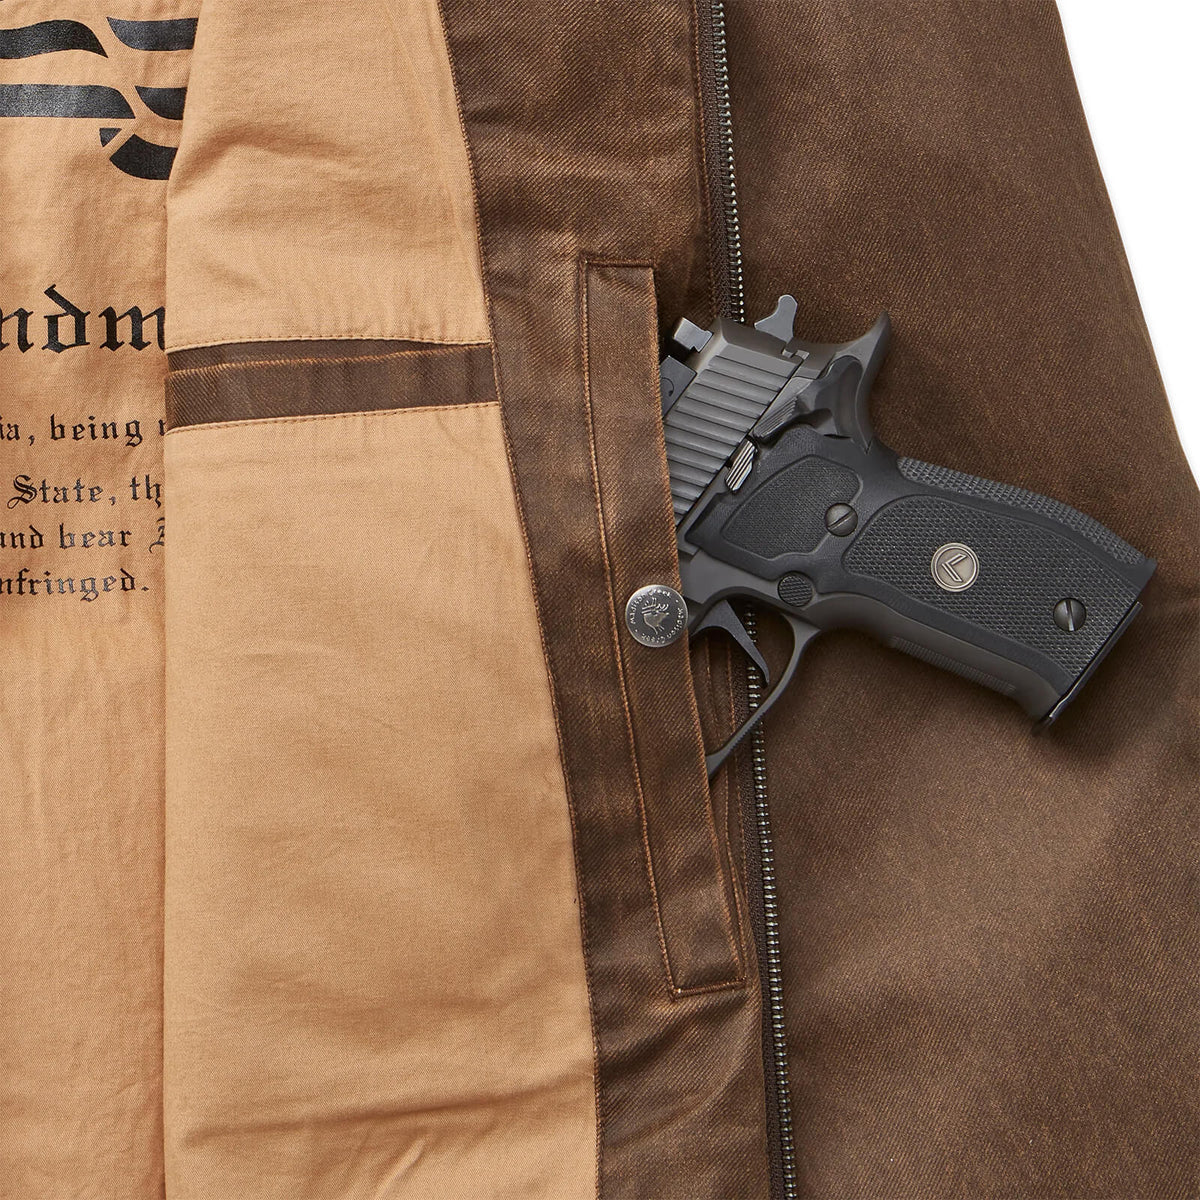 Chore Concealed Carry Twill Jacket